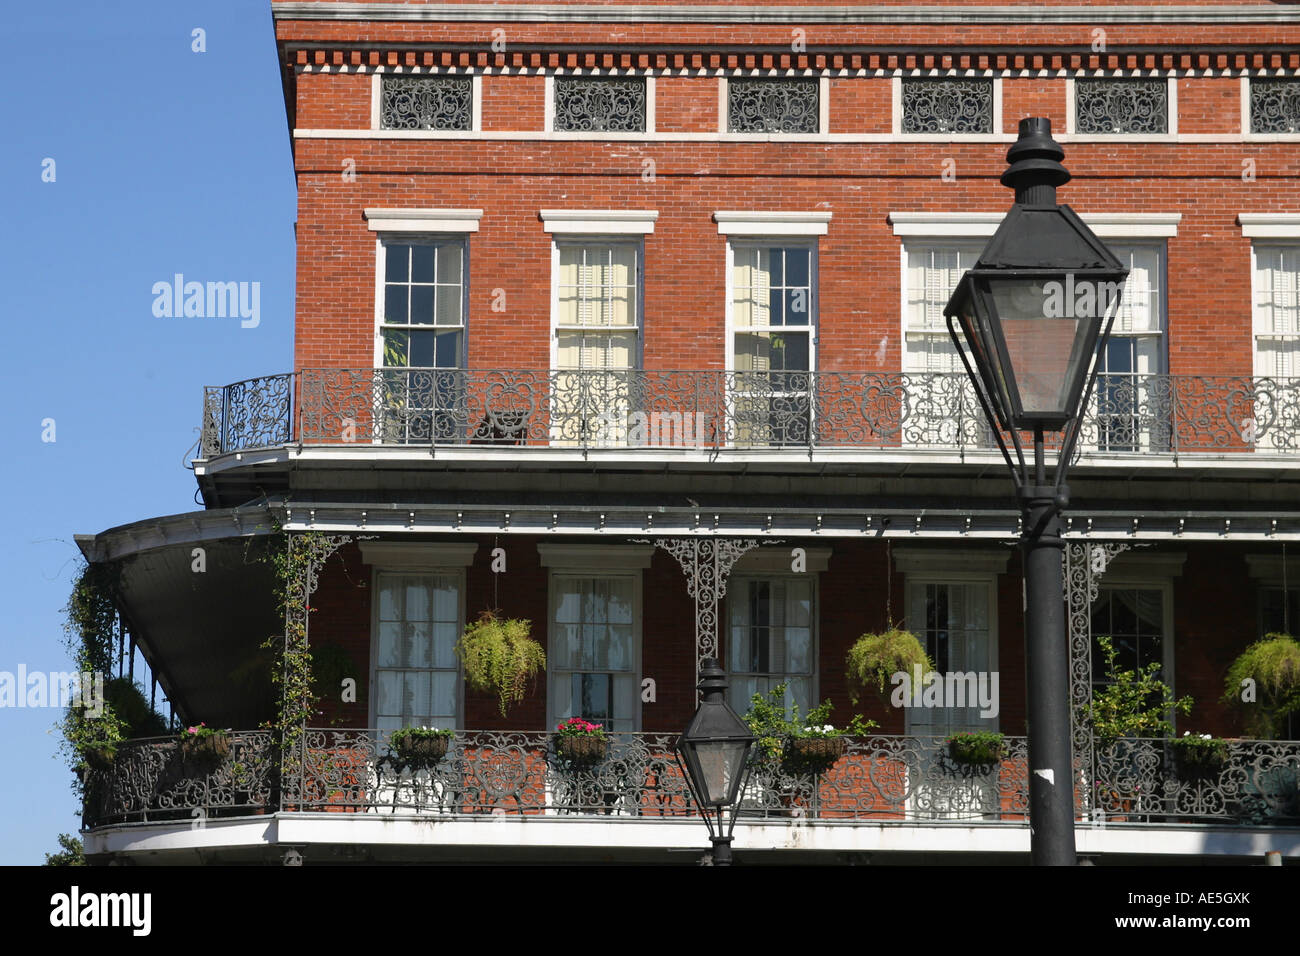 Building in classic New Orleans  architecture with ornate wrought ironwork on balcony railings with gas lamp - French Quarter Stock Photo